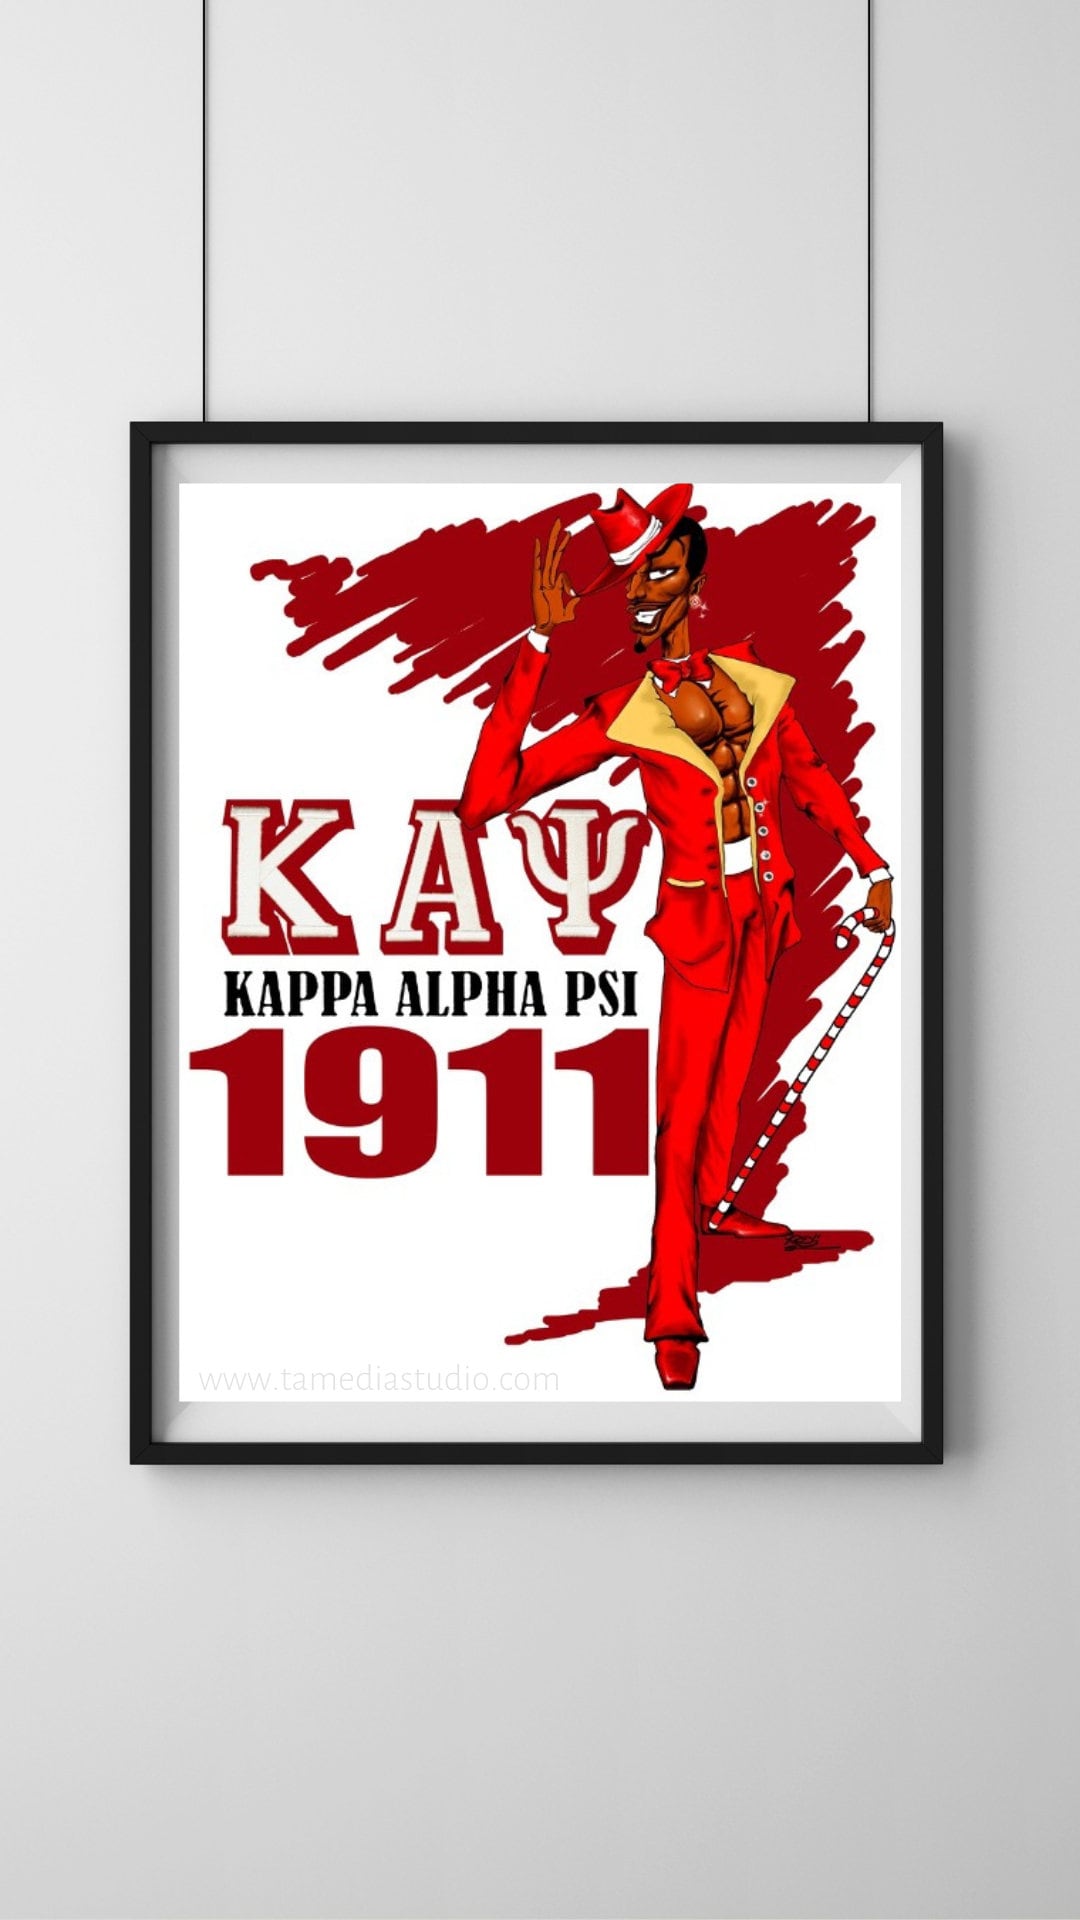 Kappa Alpha Psi Poster - Kappa Poster | Nupe | 1911 Fraternity | Divine 9 | Fraternity Wall Art